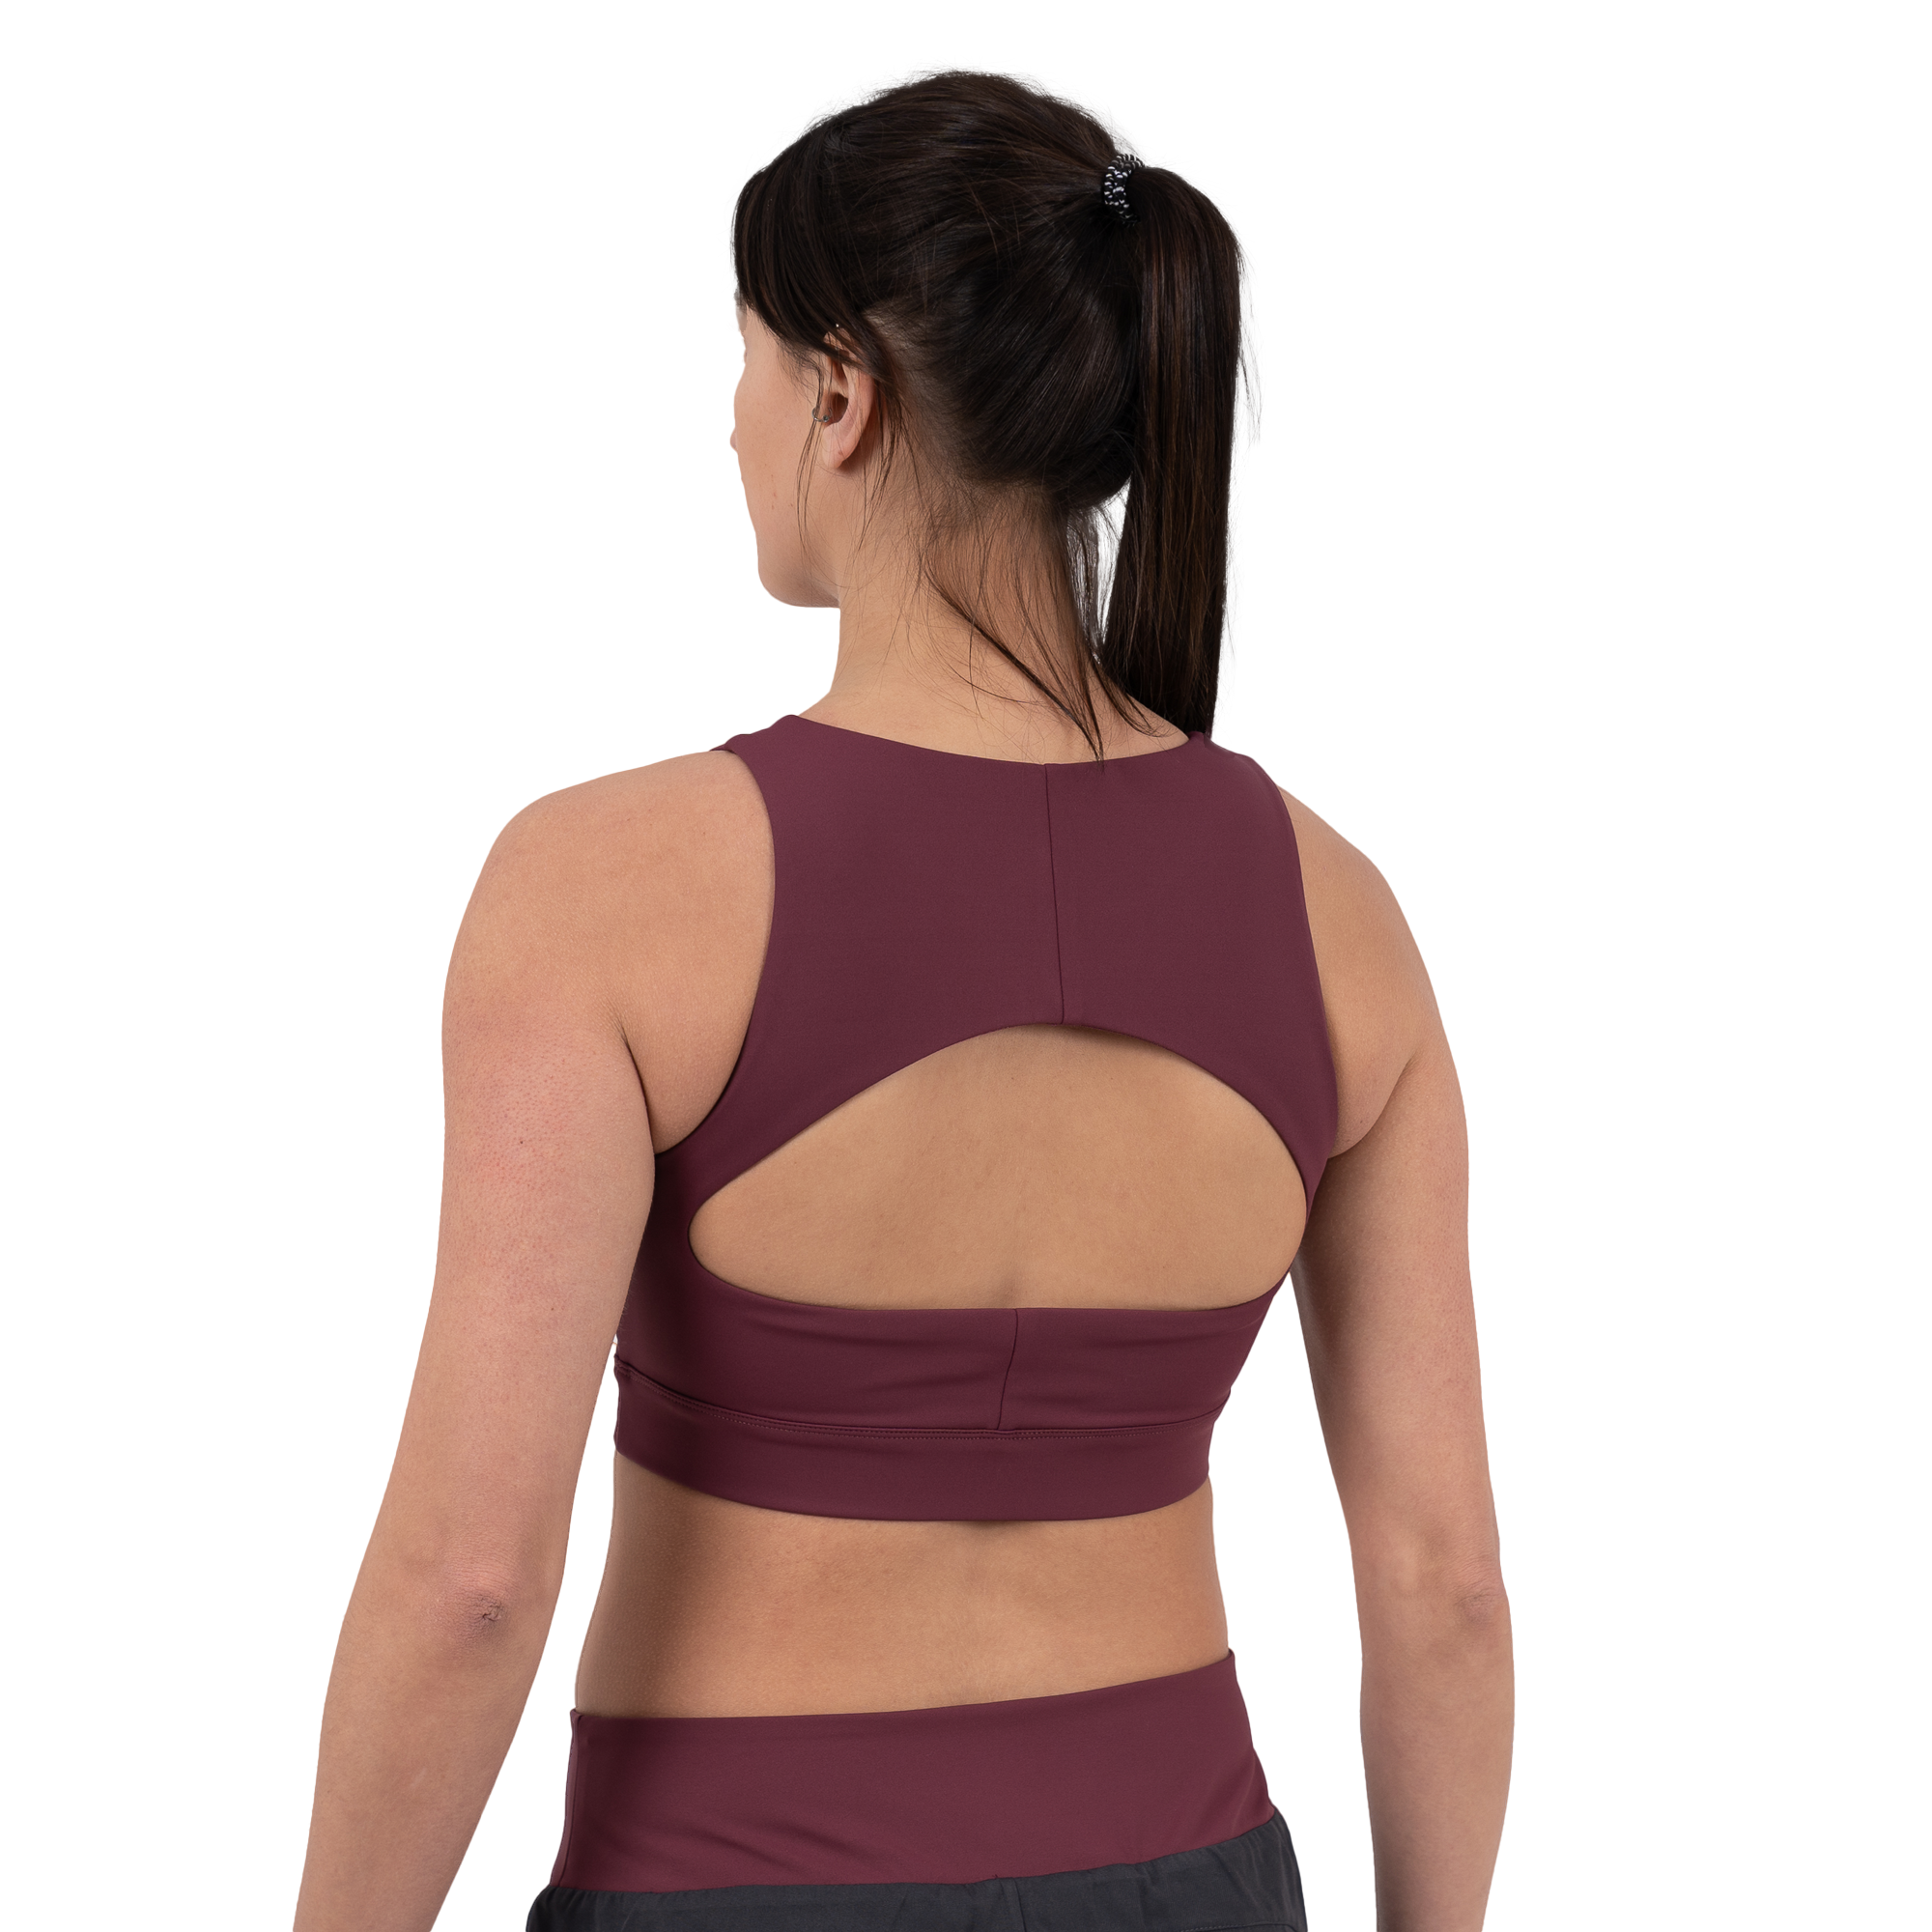 Hearts Cropped Tank Top - Burgundy